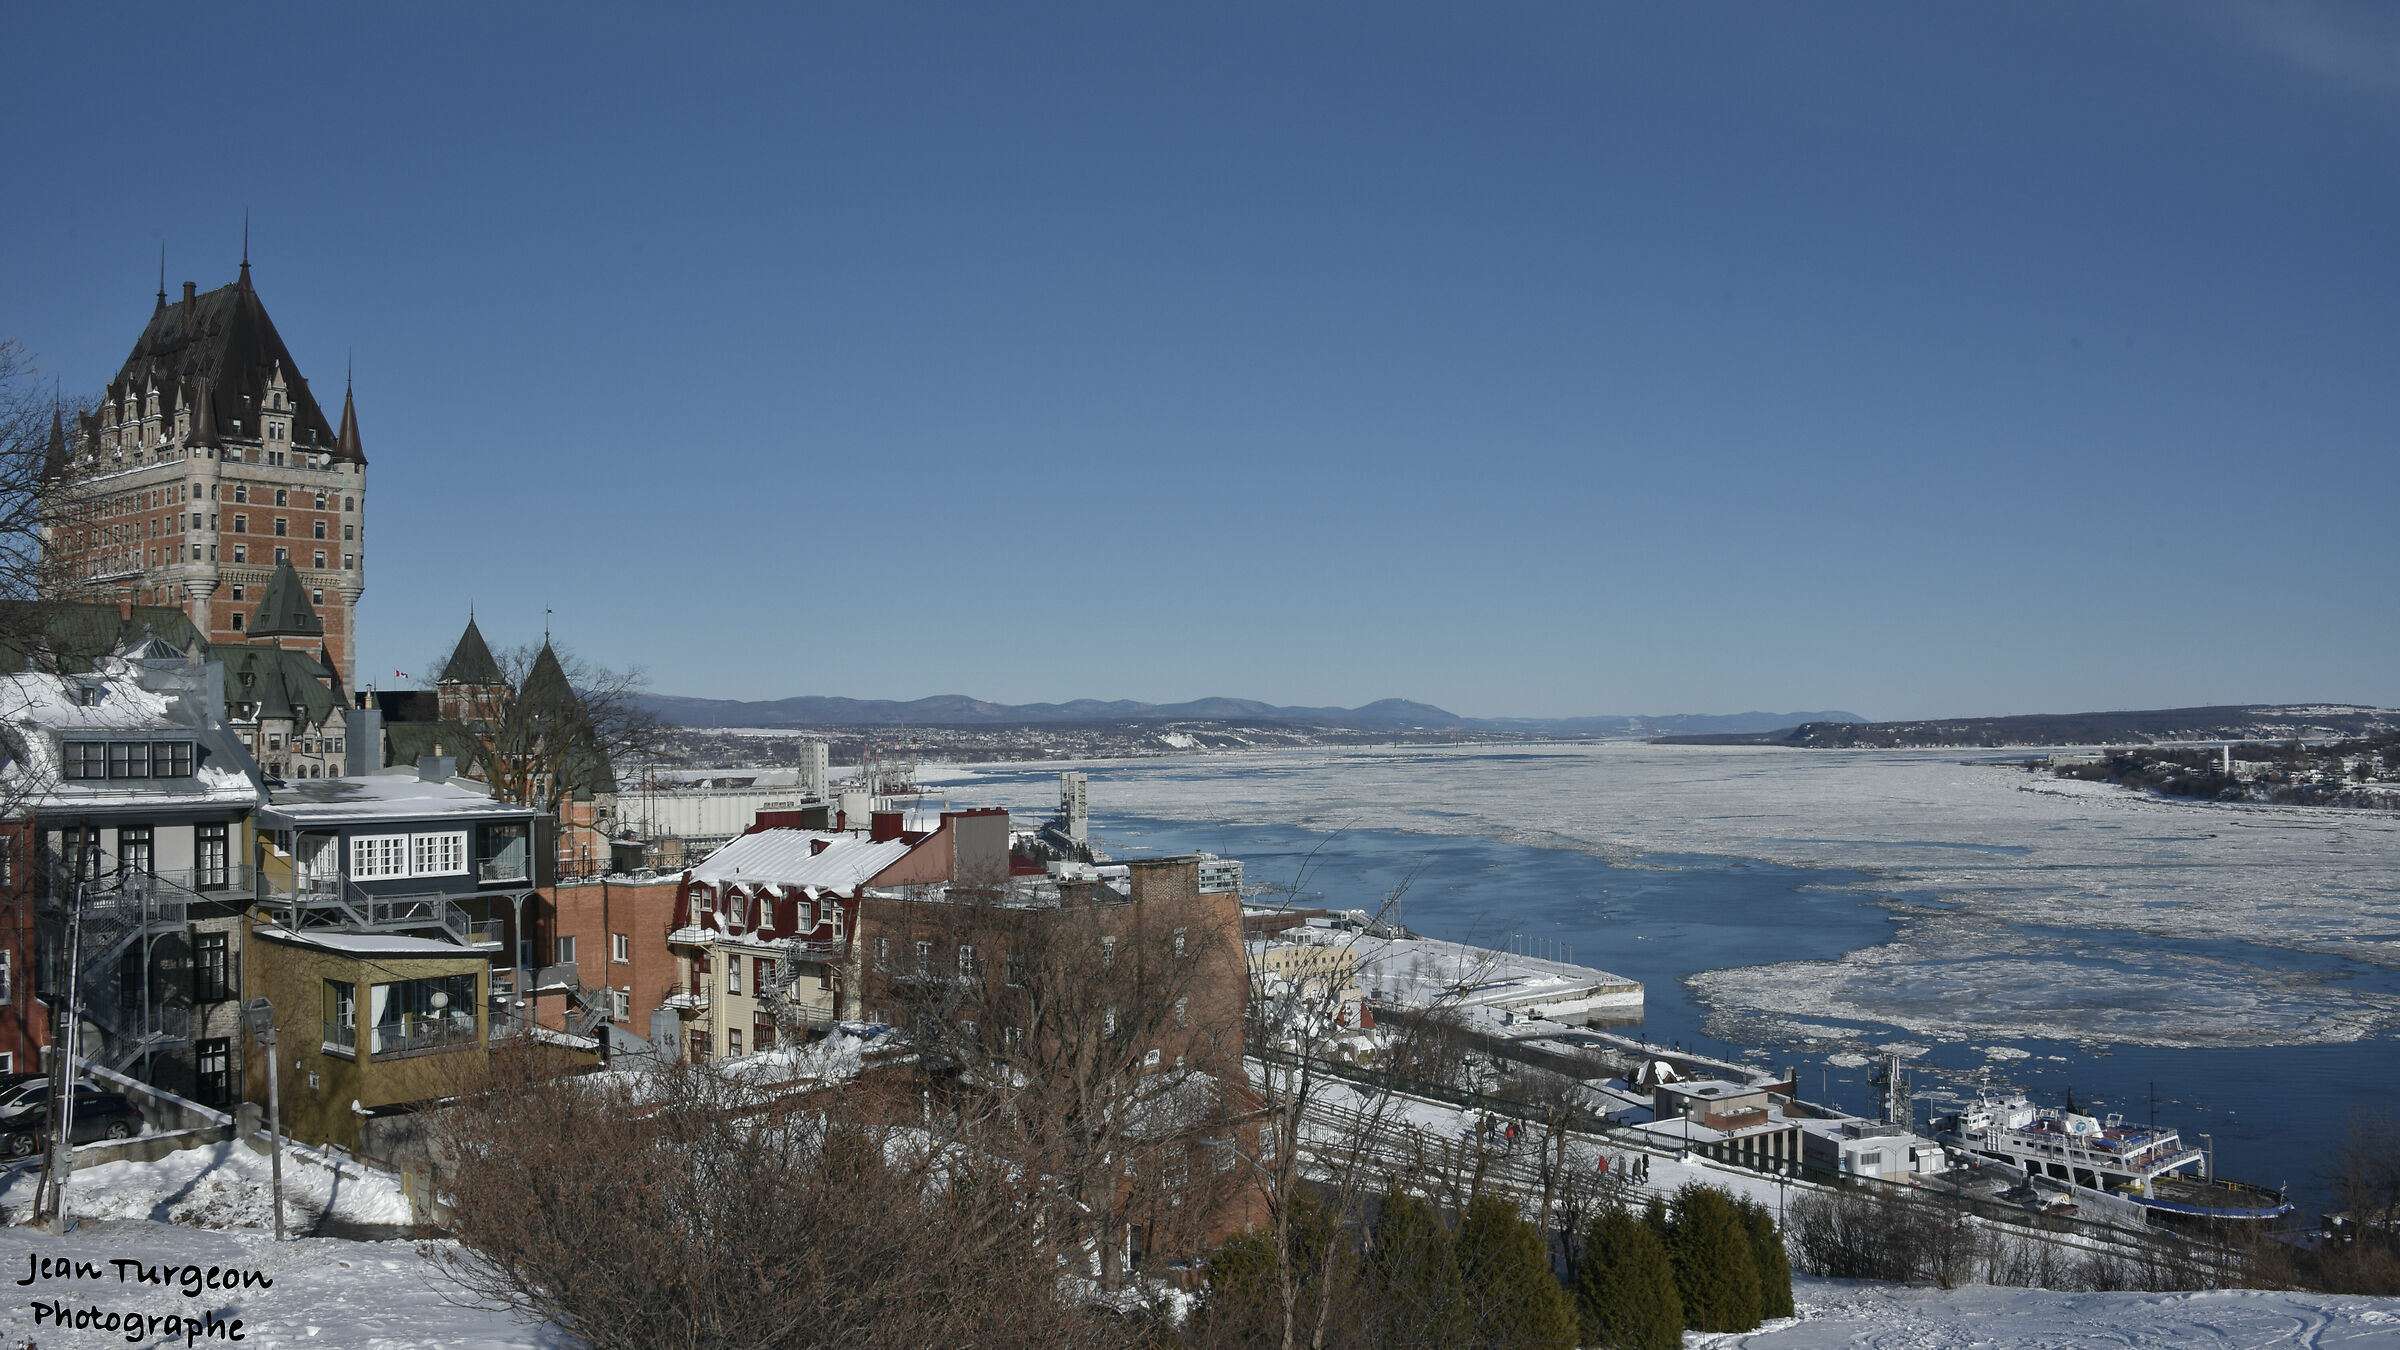 The cold, the ice on the St. Lawrence River in Quebec.....